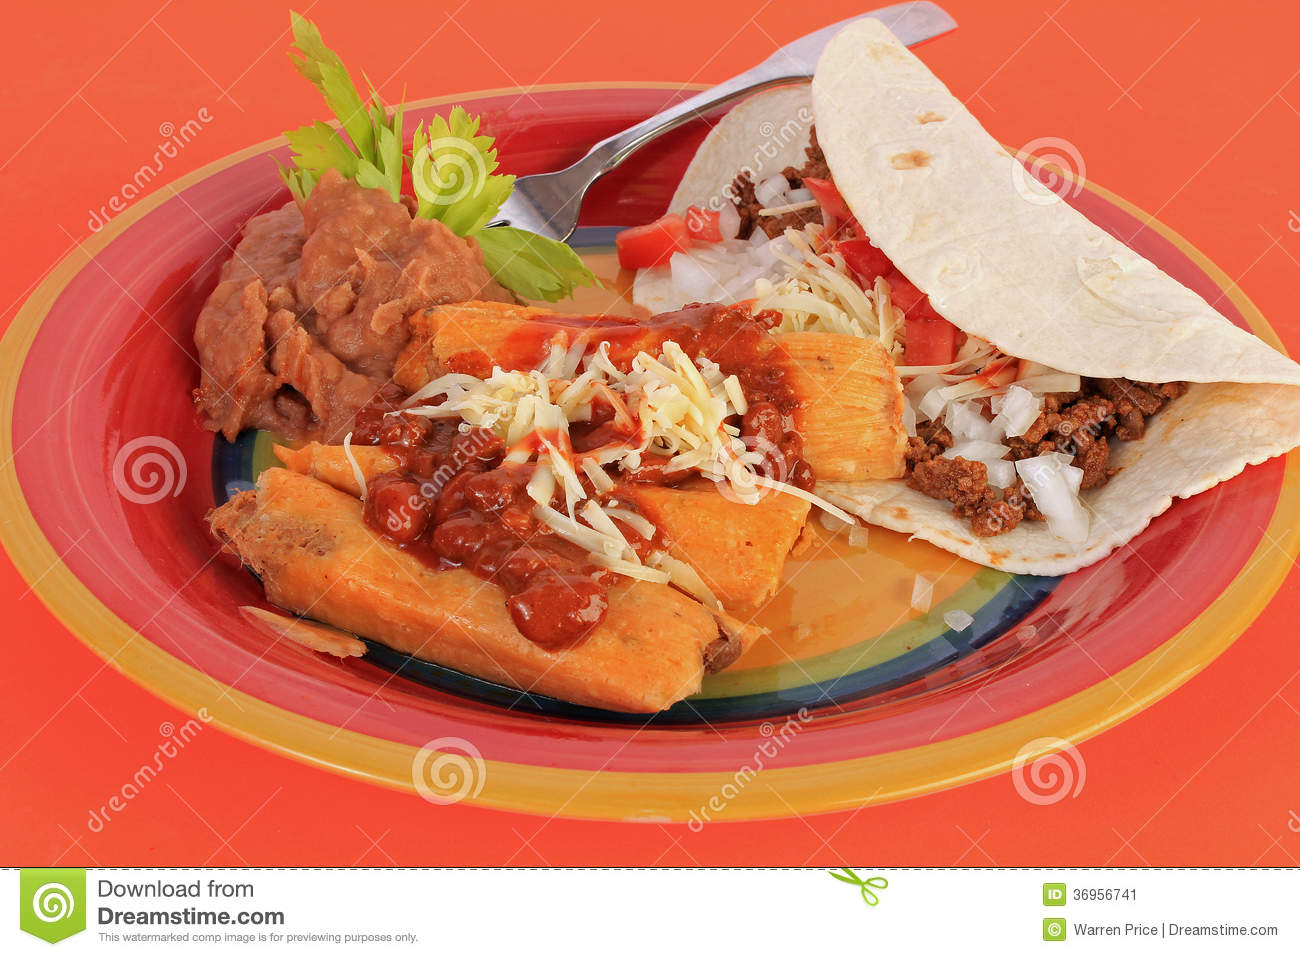     Of Pork Tamales On Colorful Plate With Soft Taco And Refried Beans